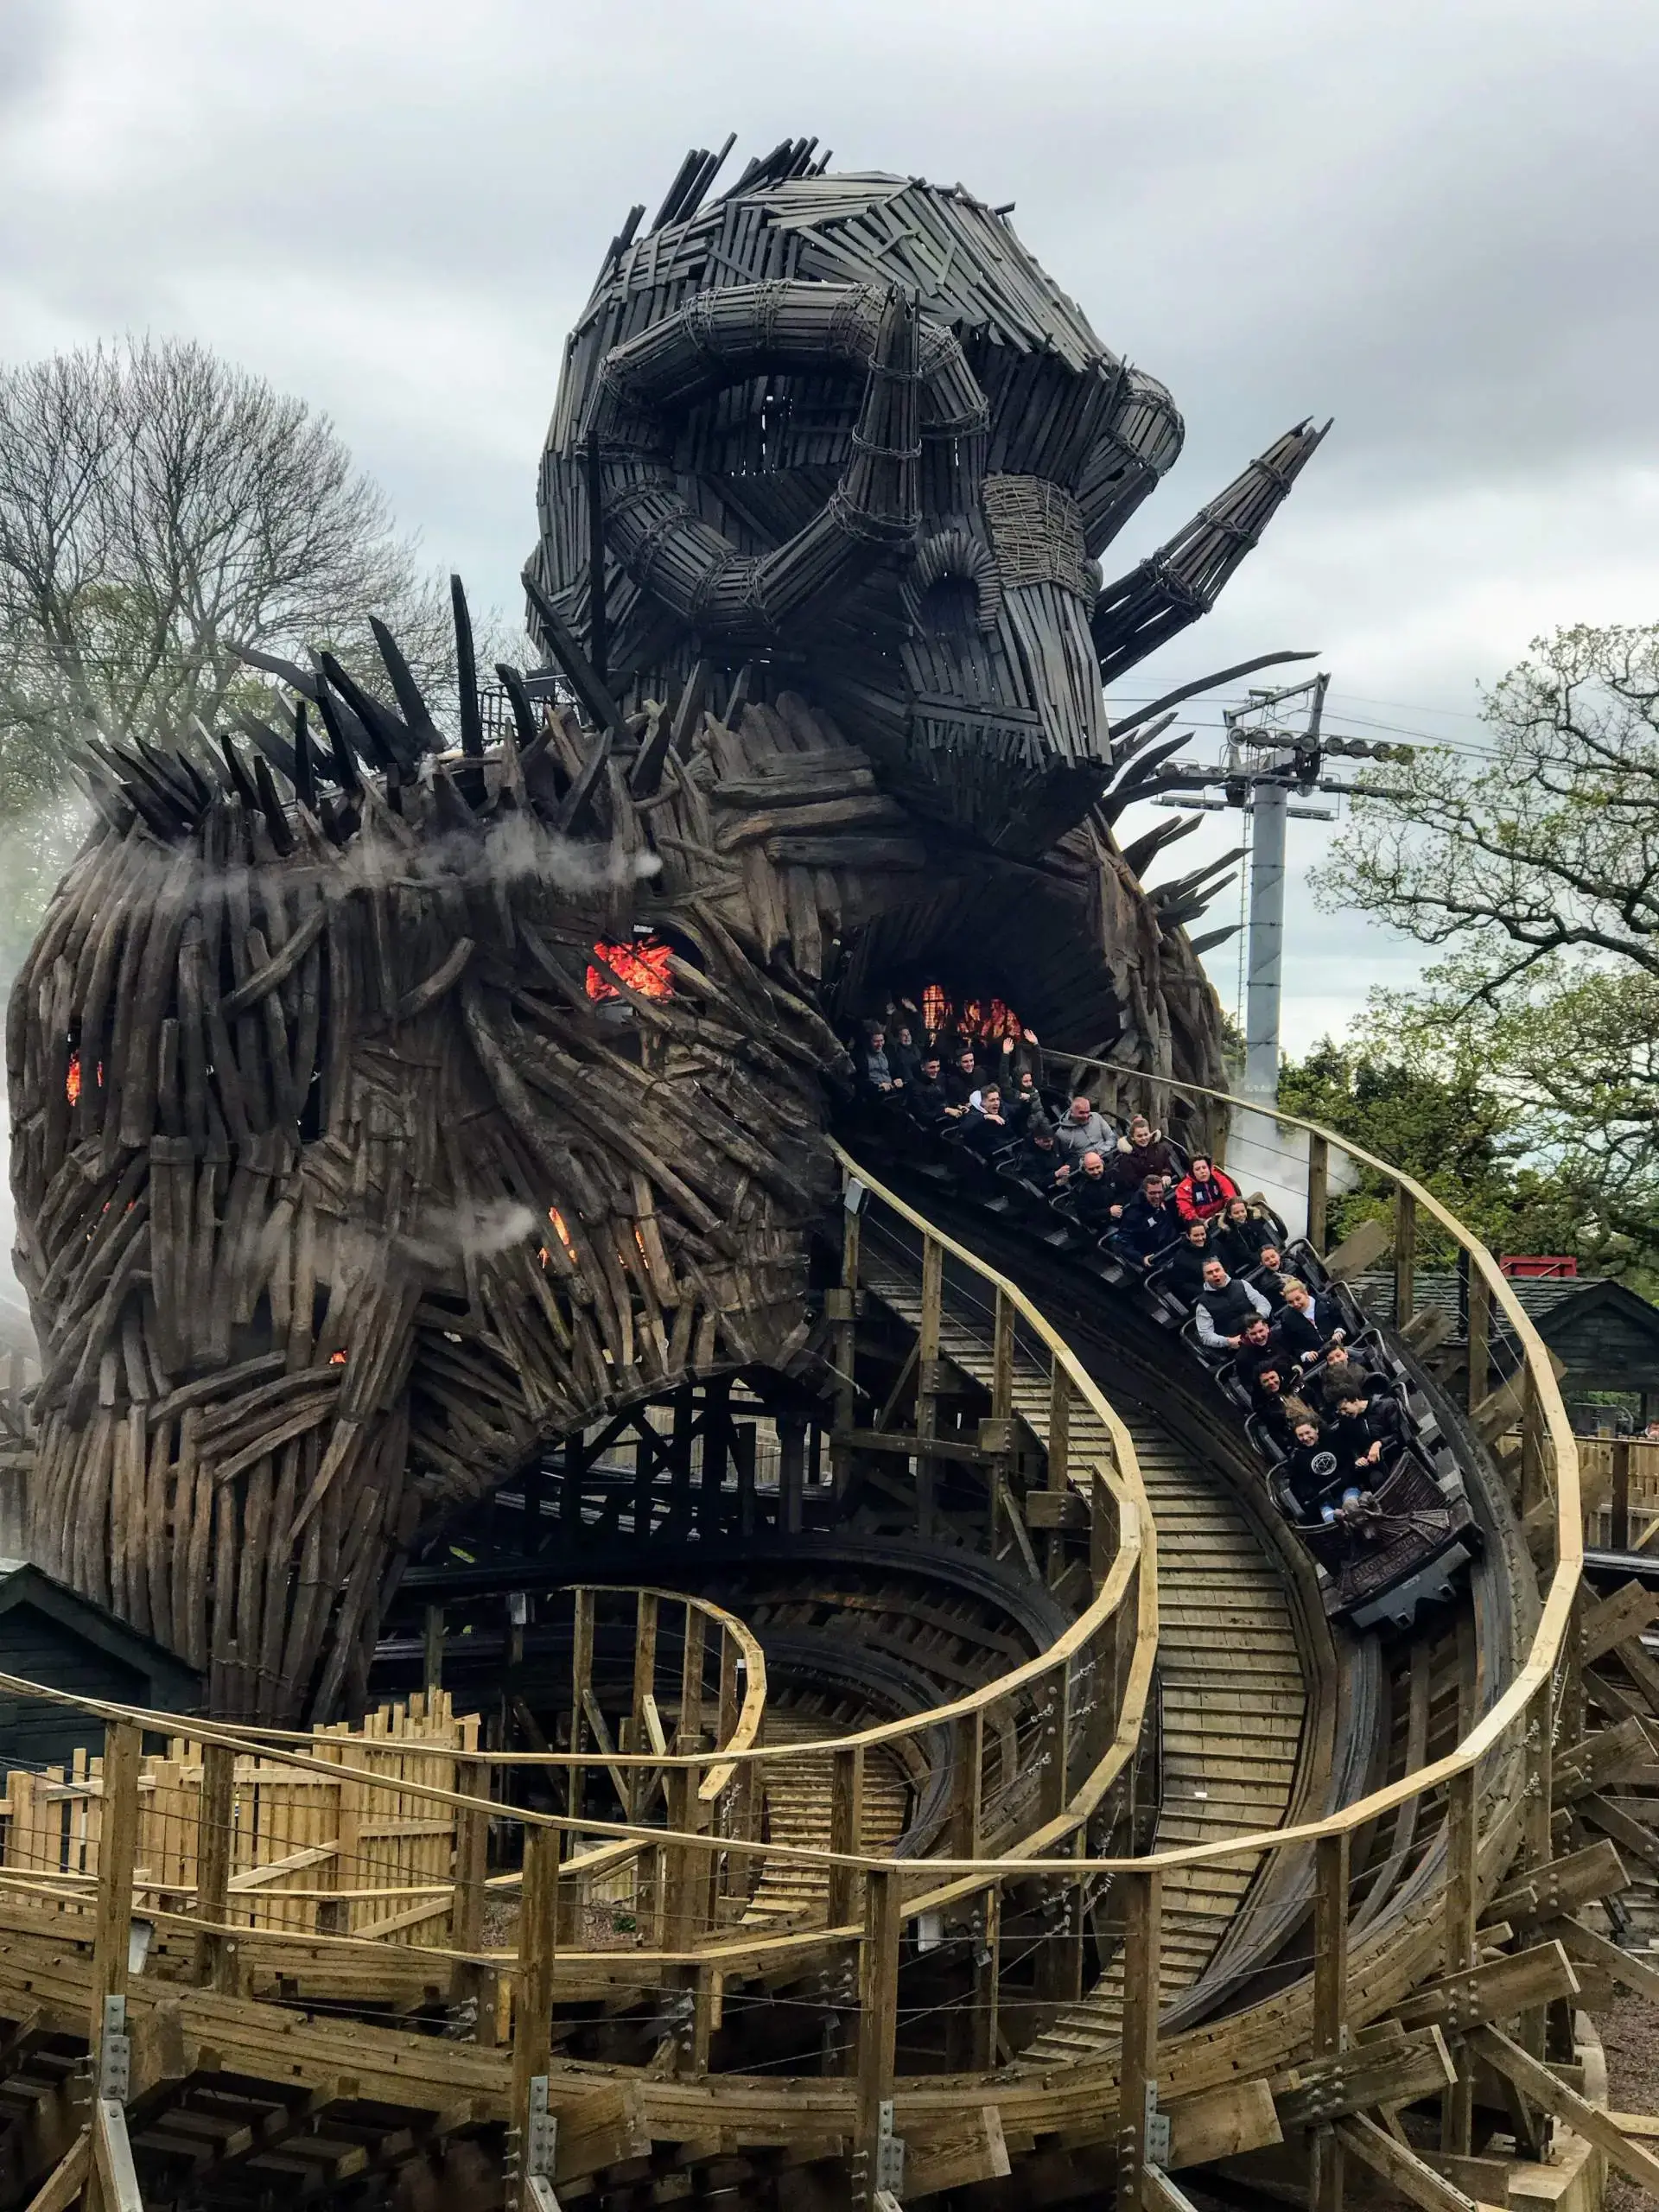 Wicker Man rollercoaster at Alton Towers